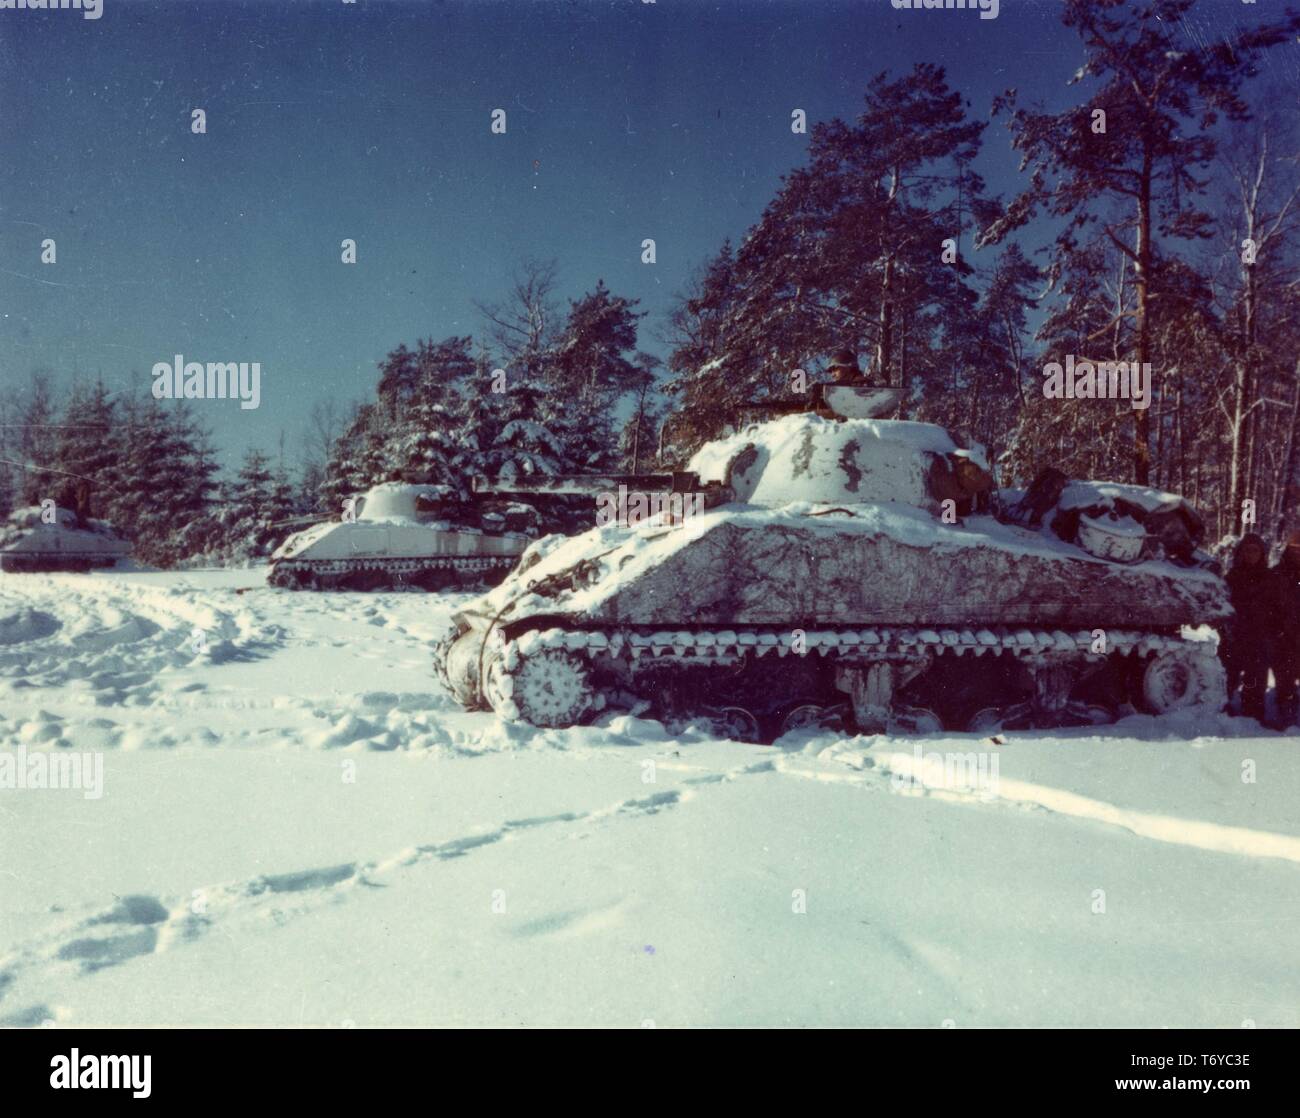 M-4 Sherman tanks of the 10th Tank Battalion lined up on a snow-covered field, during the Battle of the Bulge in World War II, near St Vith, Belgium, 1945. Image courtesy National Archives. () Stock Photo